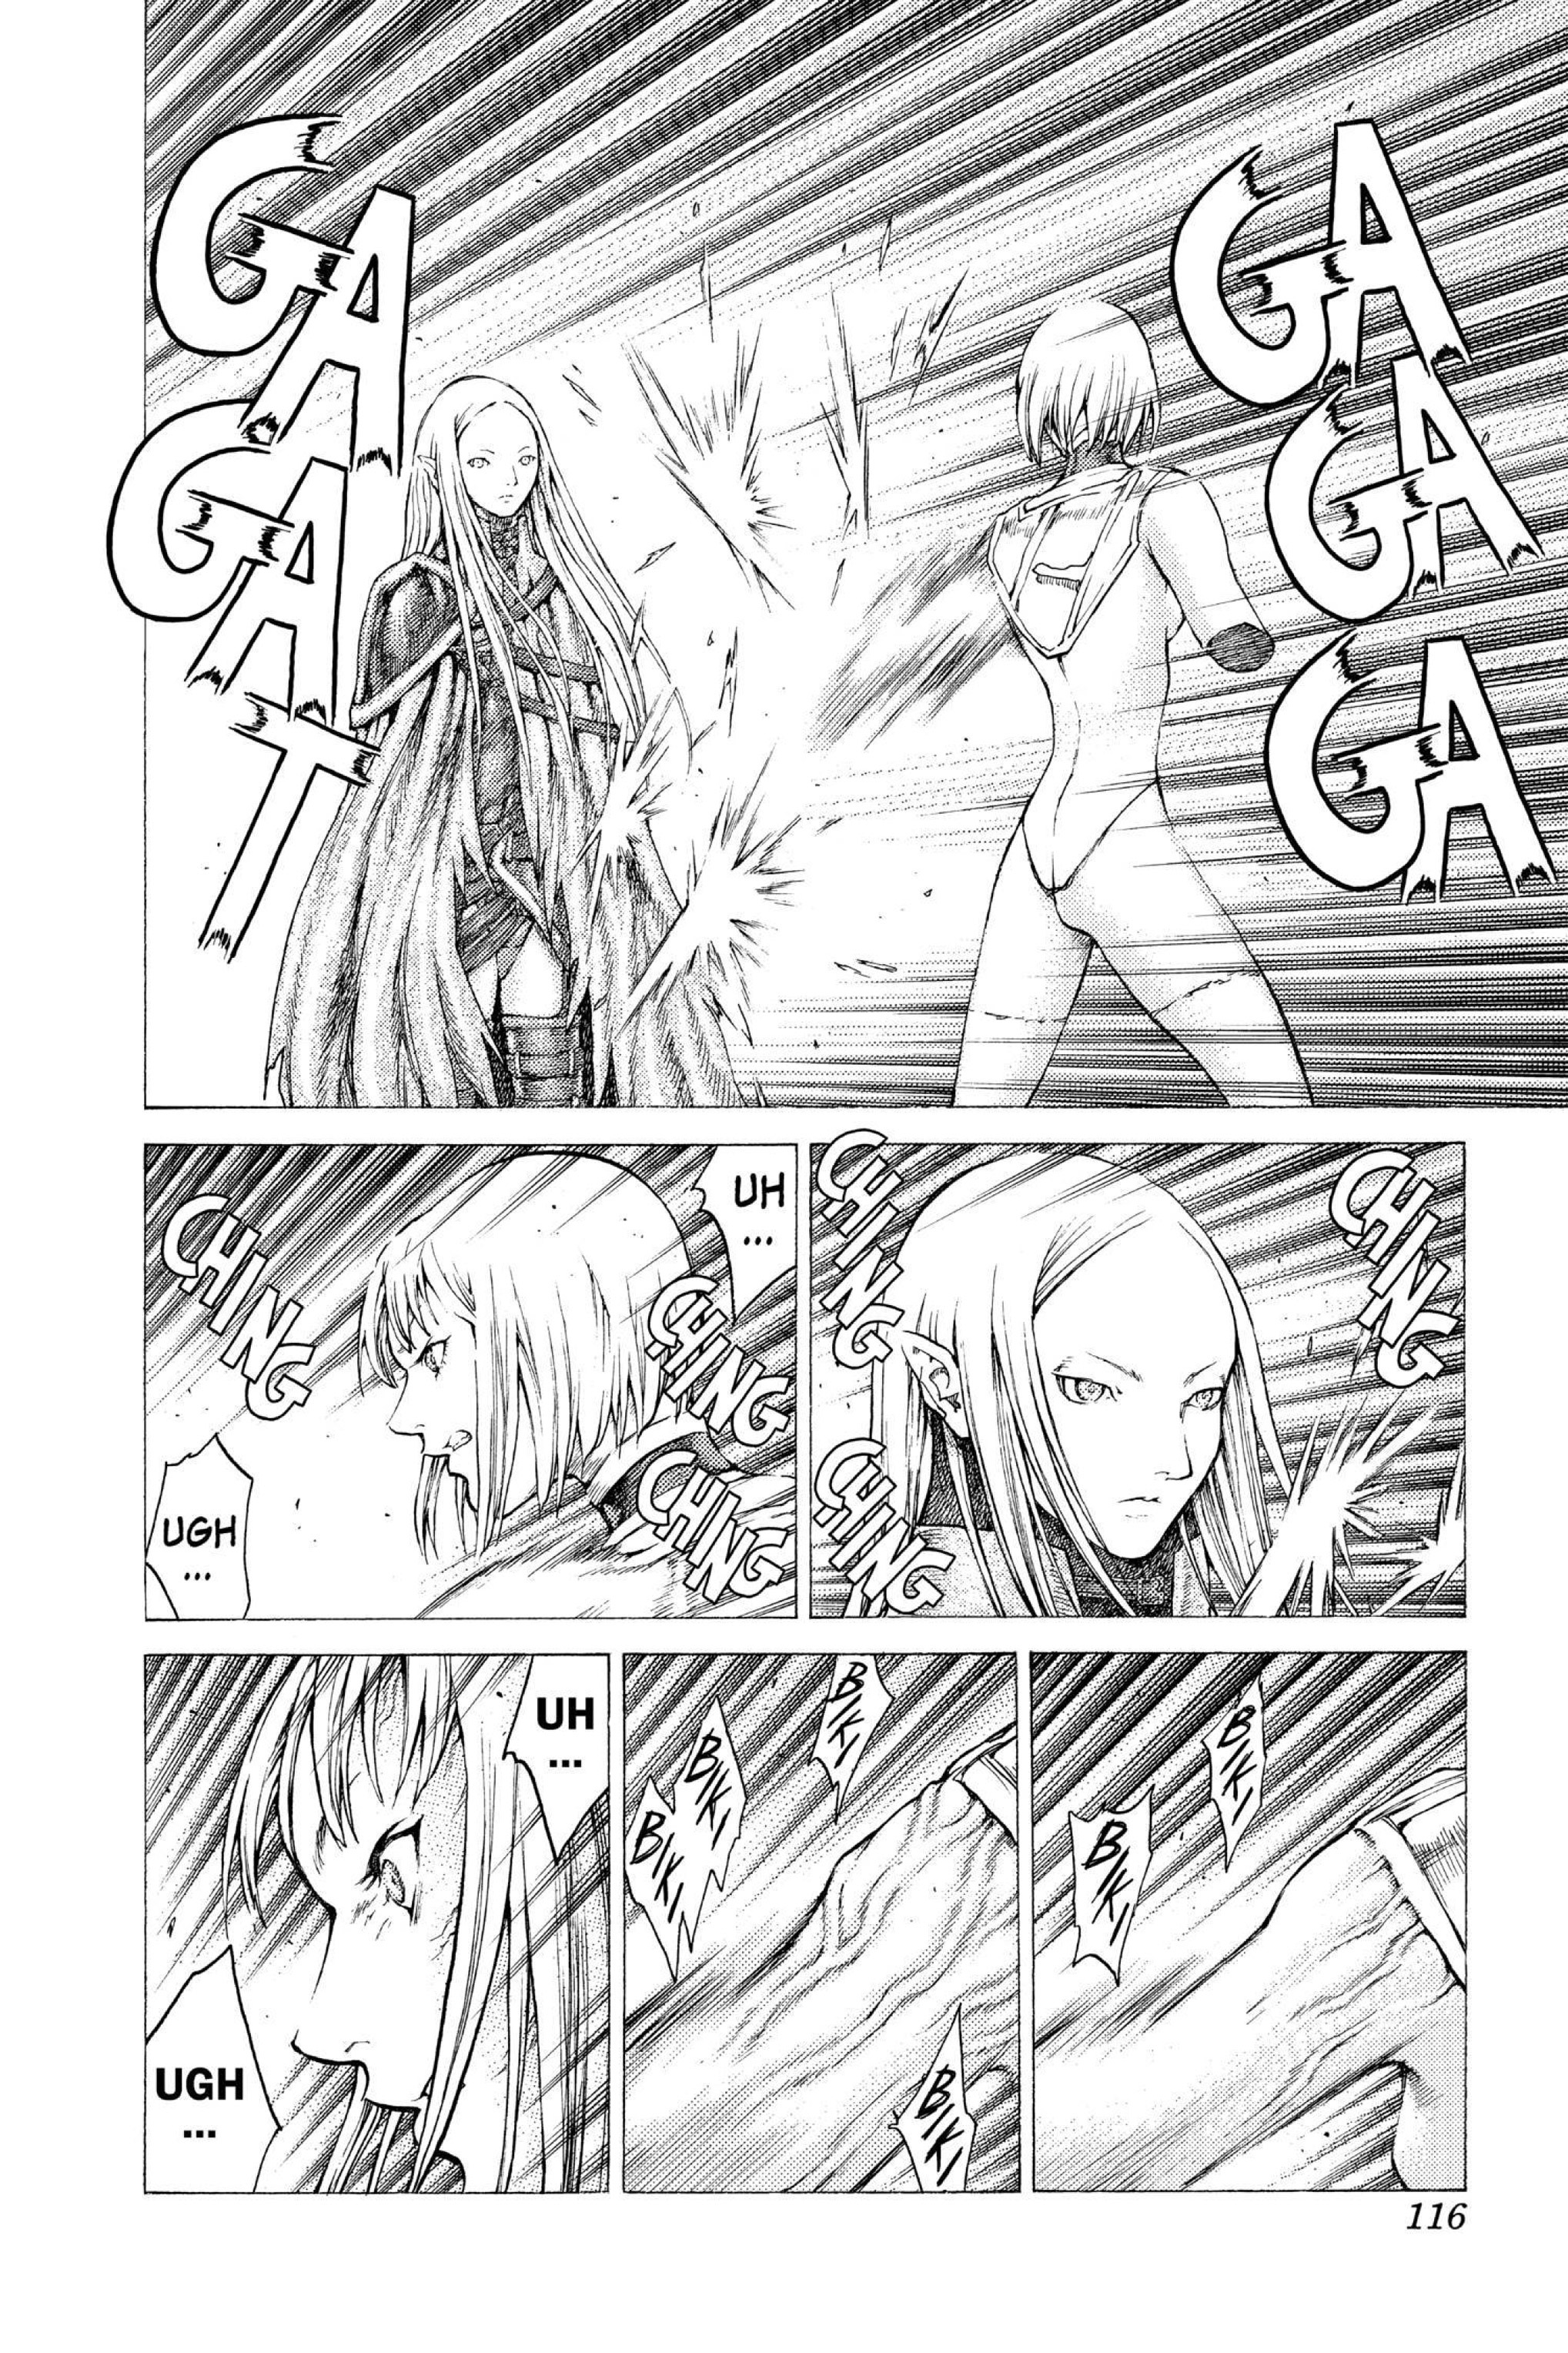 Read online Claymore comic -  Issue #7 - 109